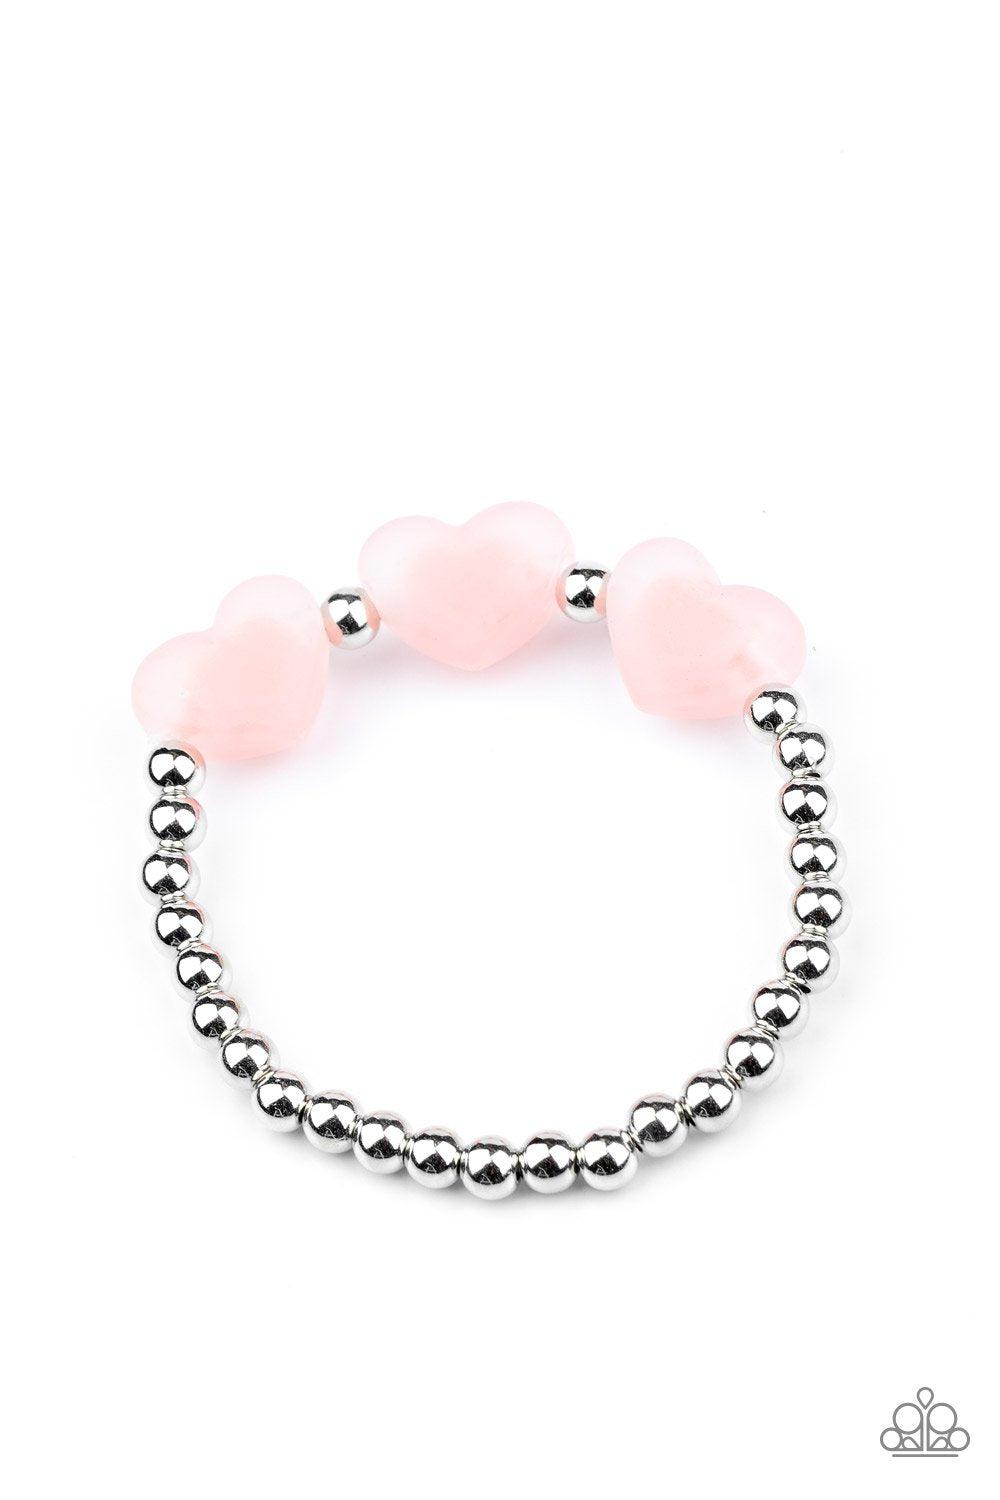 Starlet Shimmer Children&#39;s Frosted Heart Bracelets - Paparazzi Accessories (set of 5)-CarasShop.com - $5 Jewelry by Cara Jewels